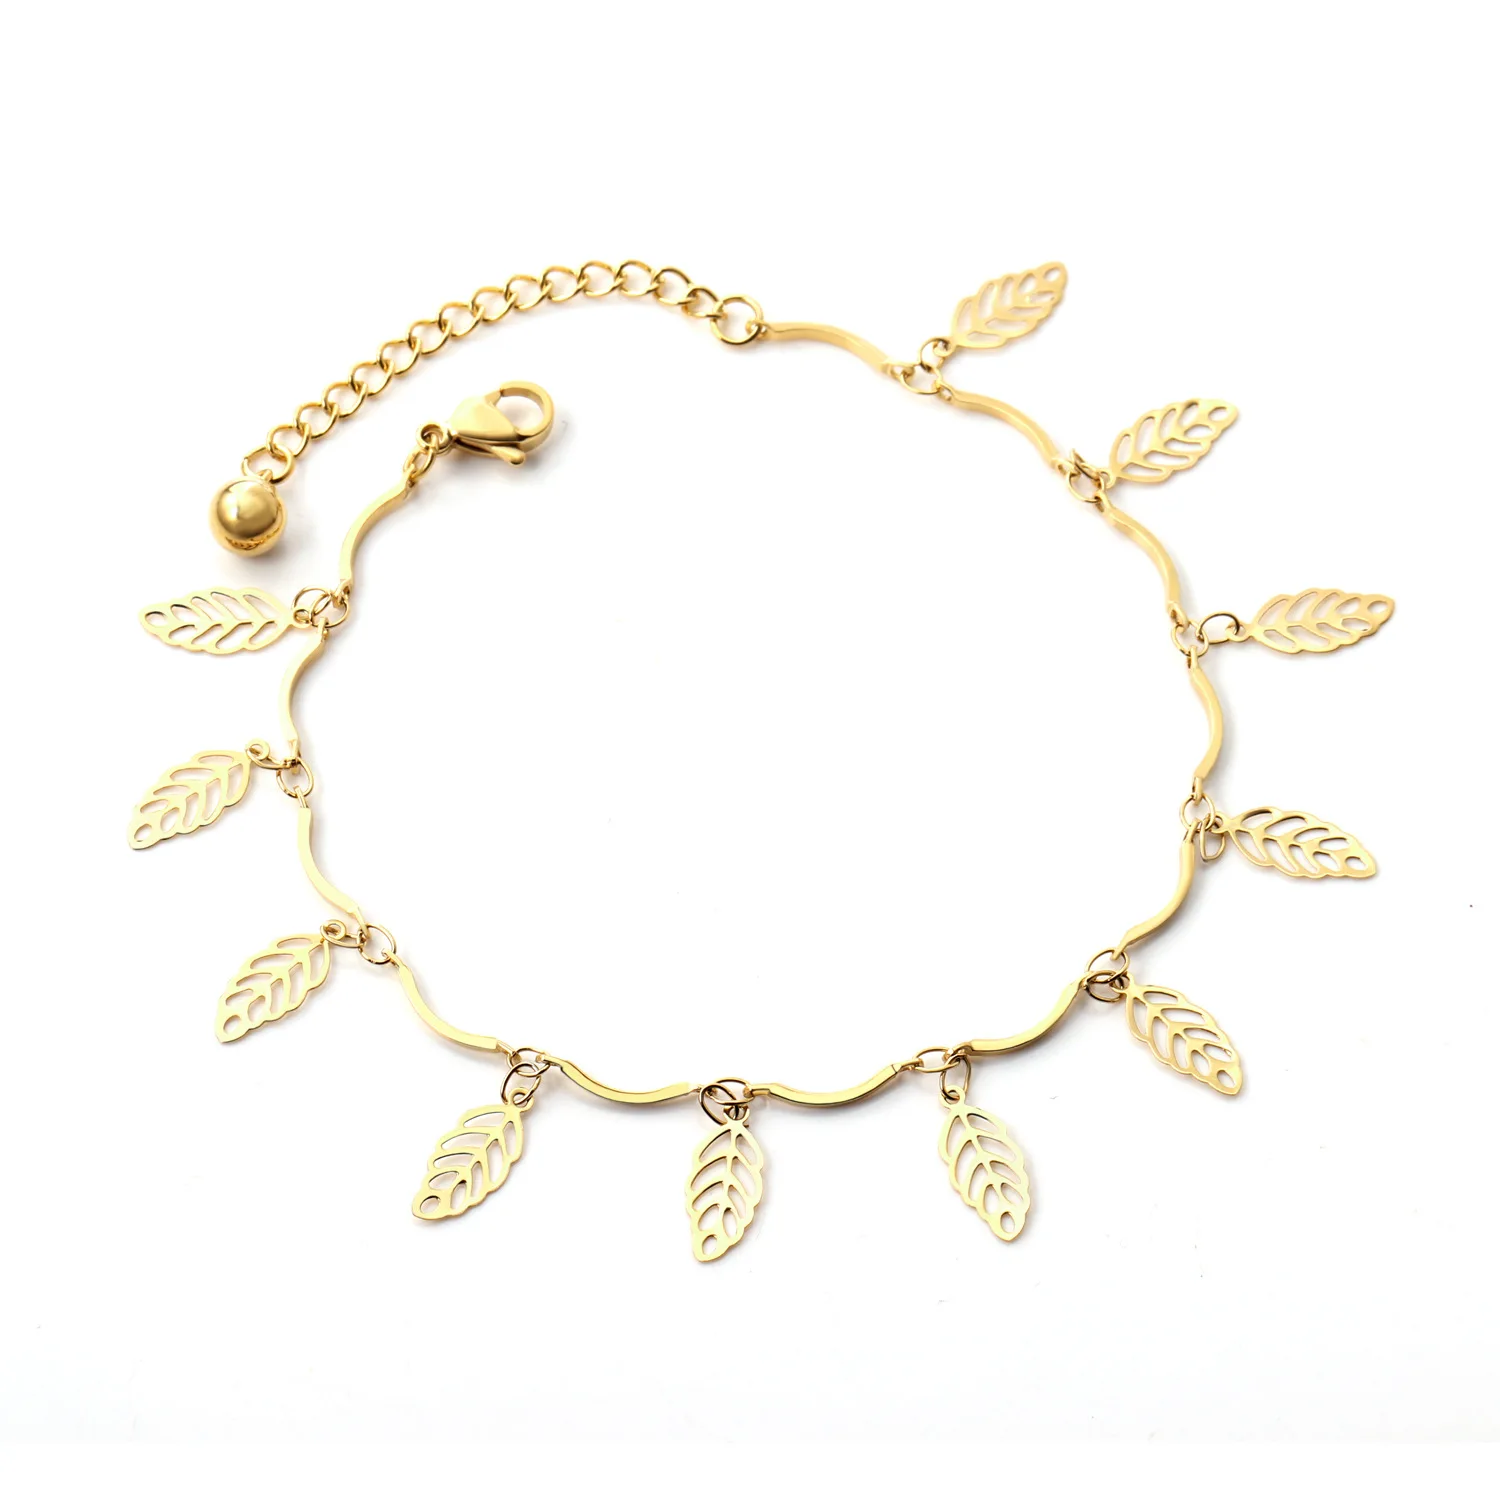 

Japanese And Korean Style 14K Gold Plated Hollow Leaf Shaped Accessories Beach Anklets Bracelet Foot Chain For Women, Different color is available